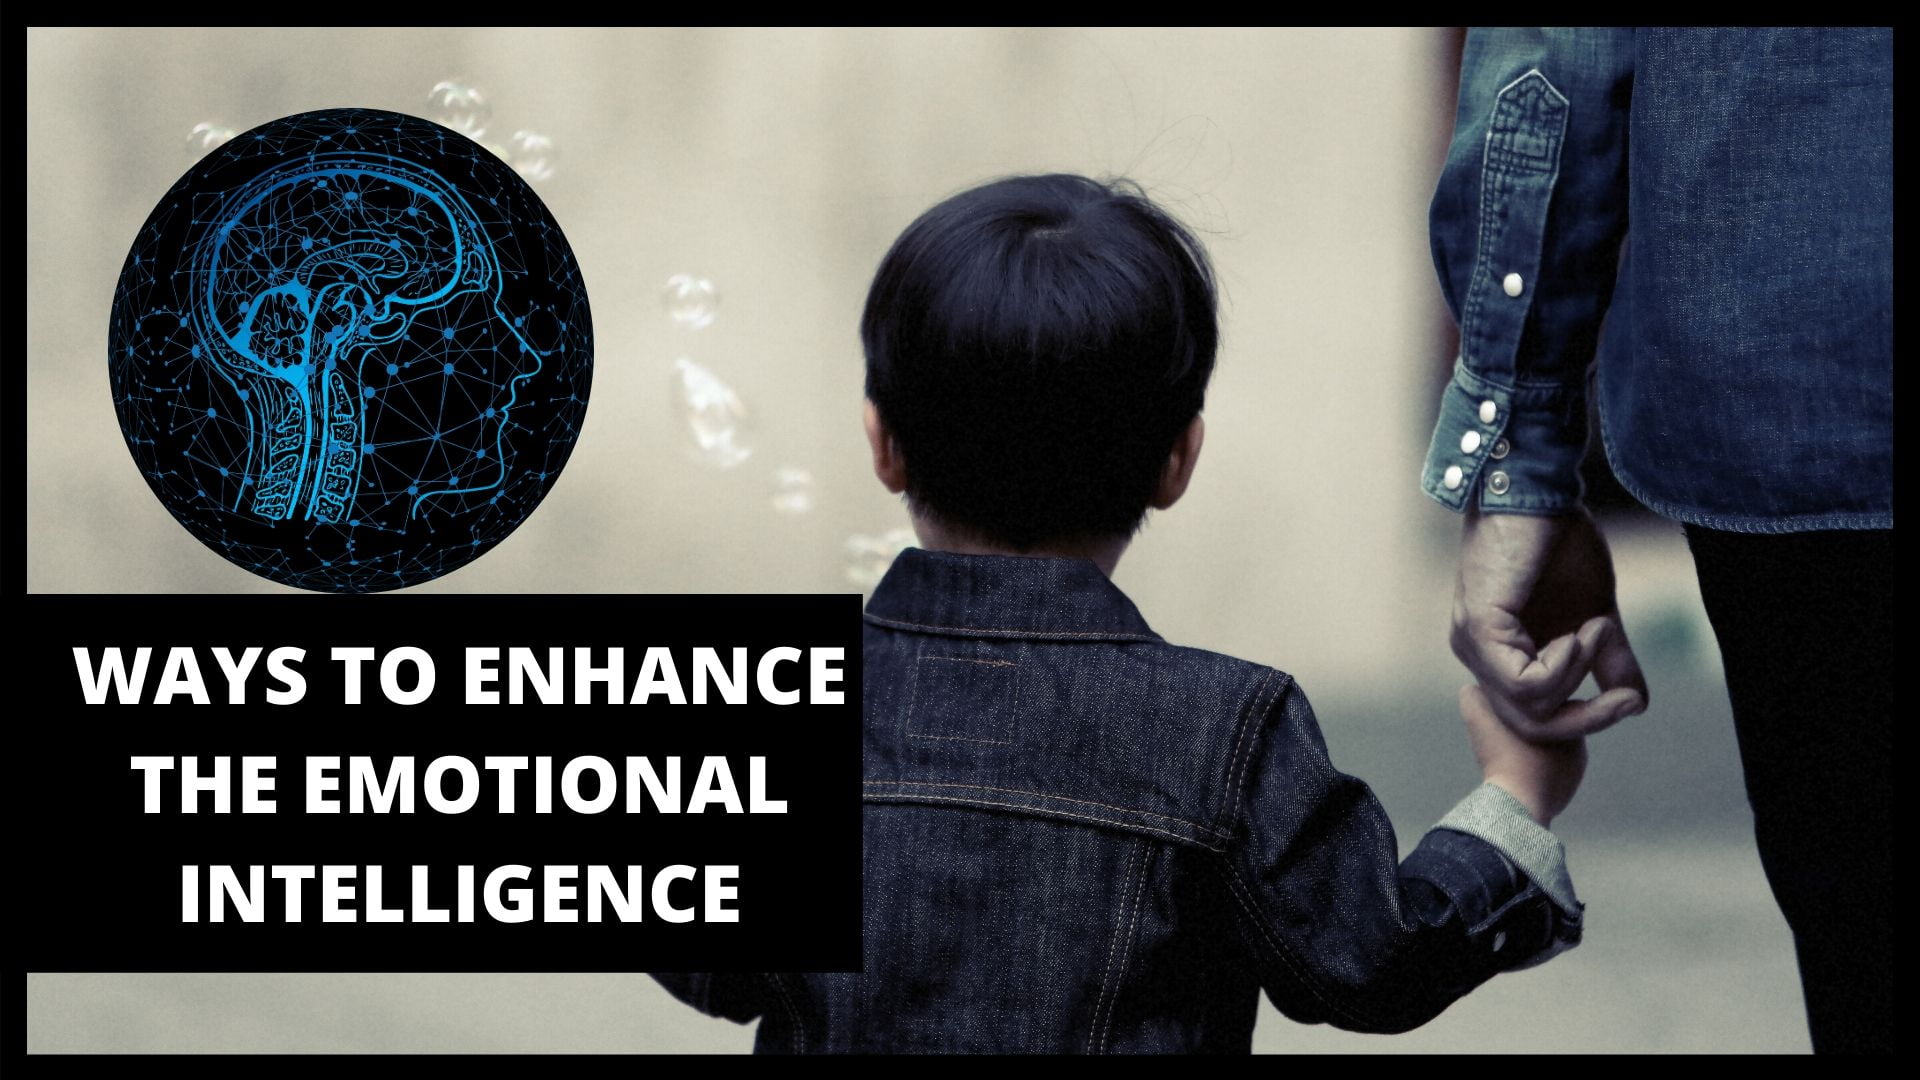 WAYS TO ENHANCE THE EMOTIONAL INTELLIGENCE IN A CHILD